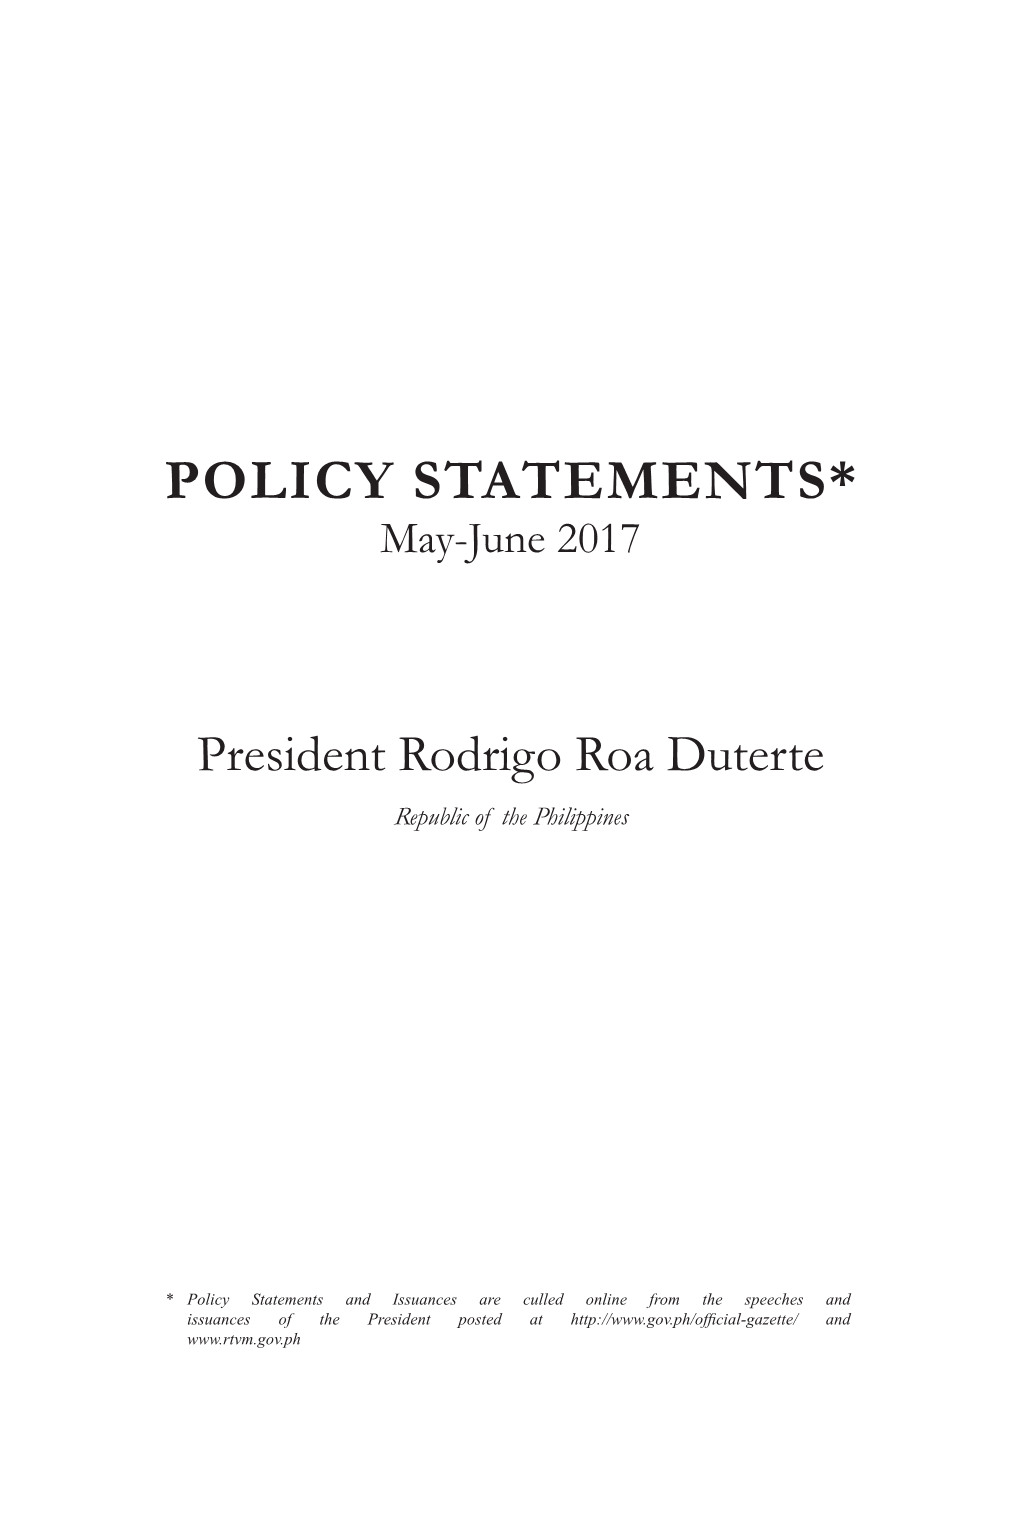 Policy Statements 3 2017 Final.Indd